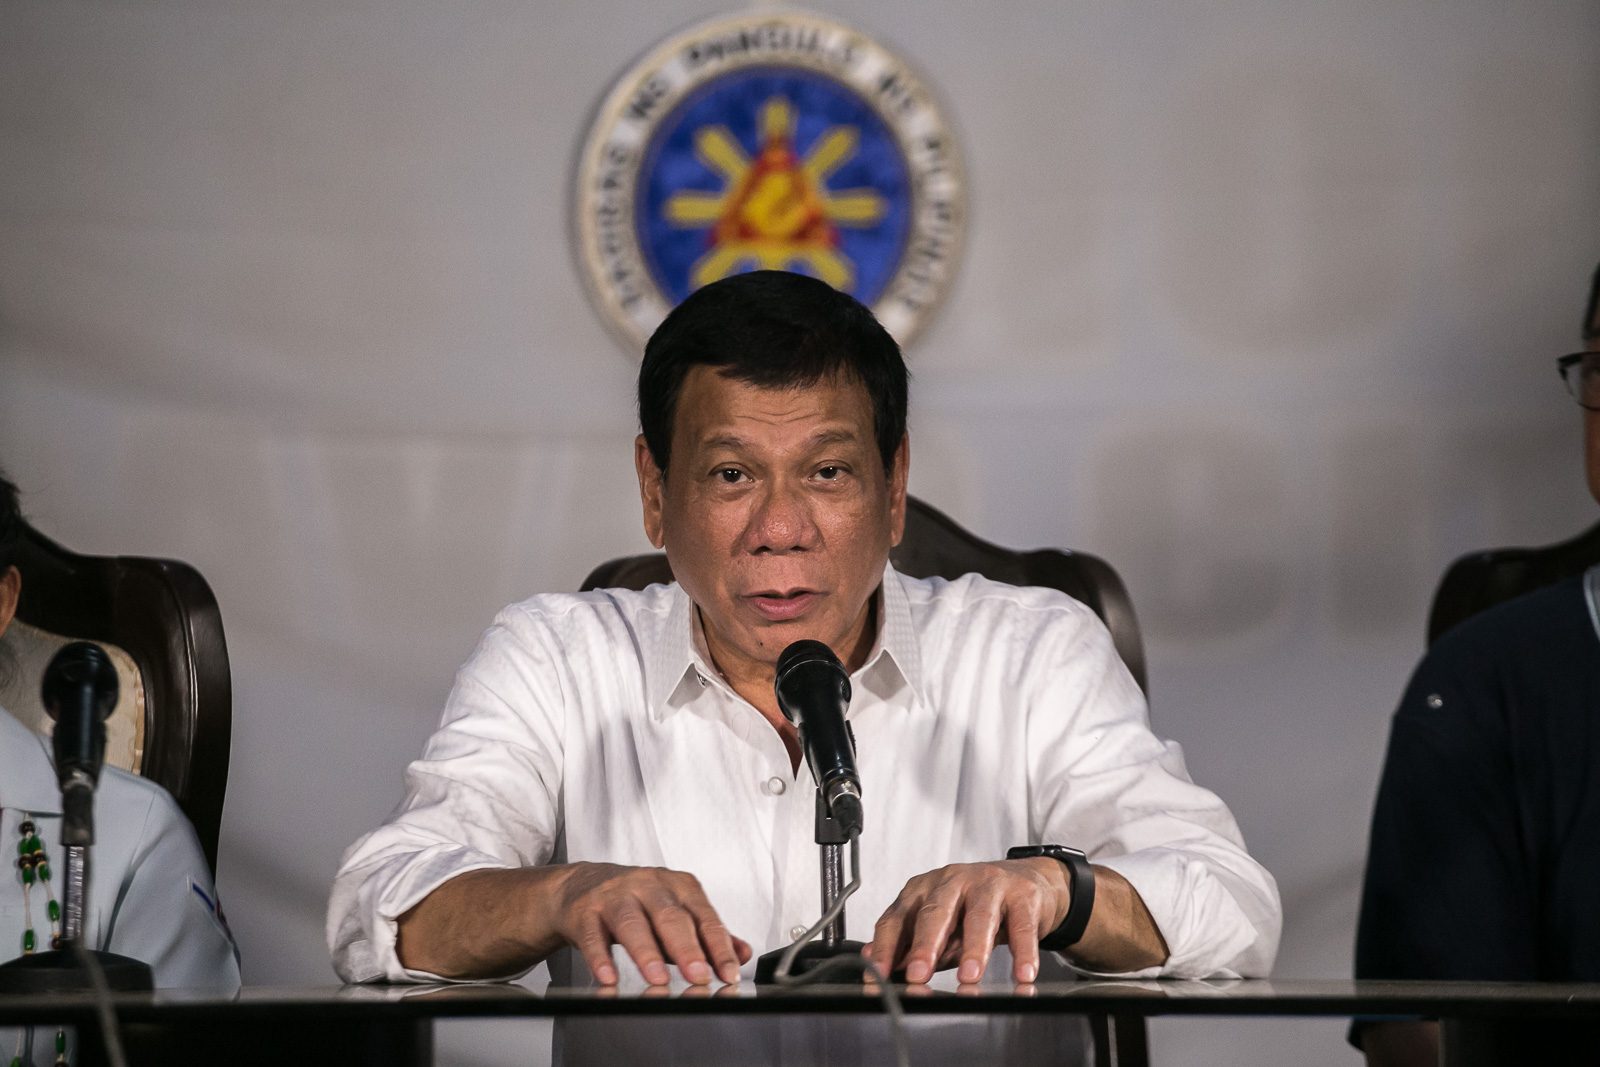 Duterte likens NPA to ISIS: ‘No ideology except to destroy and kill’